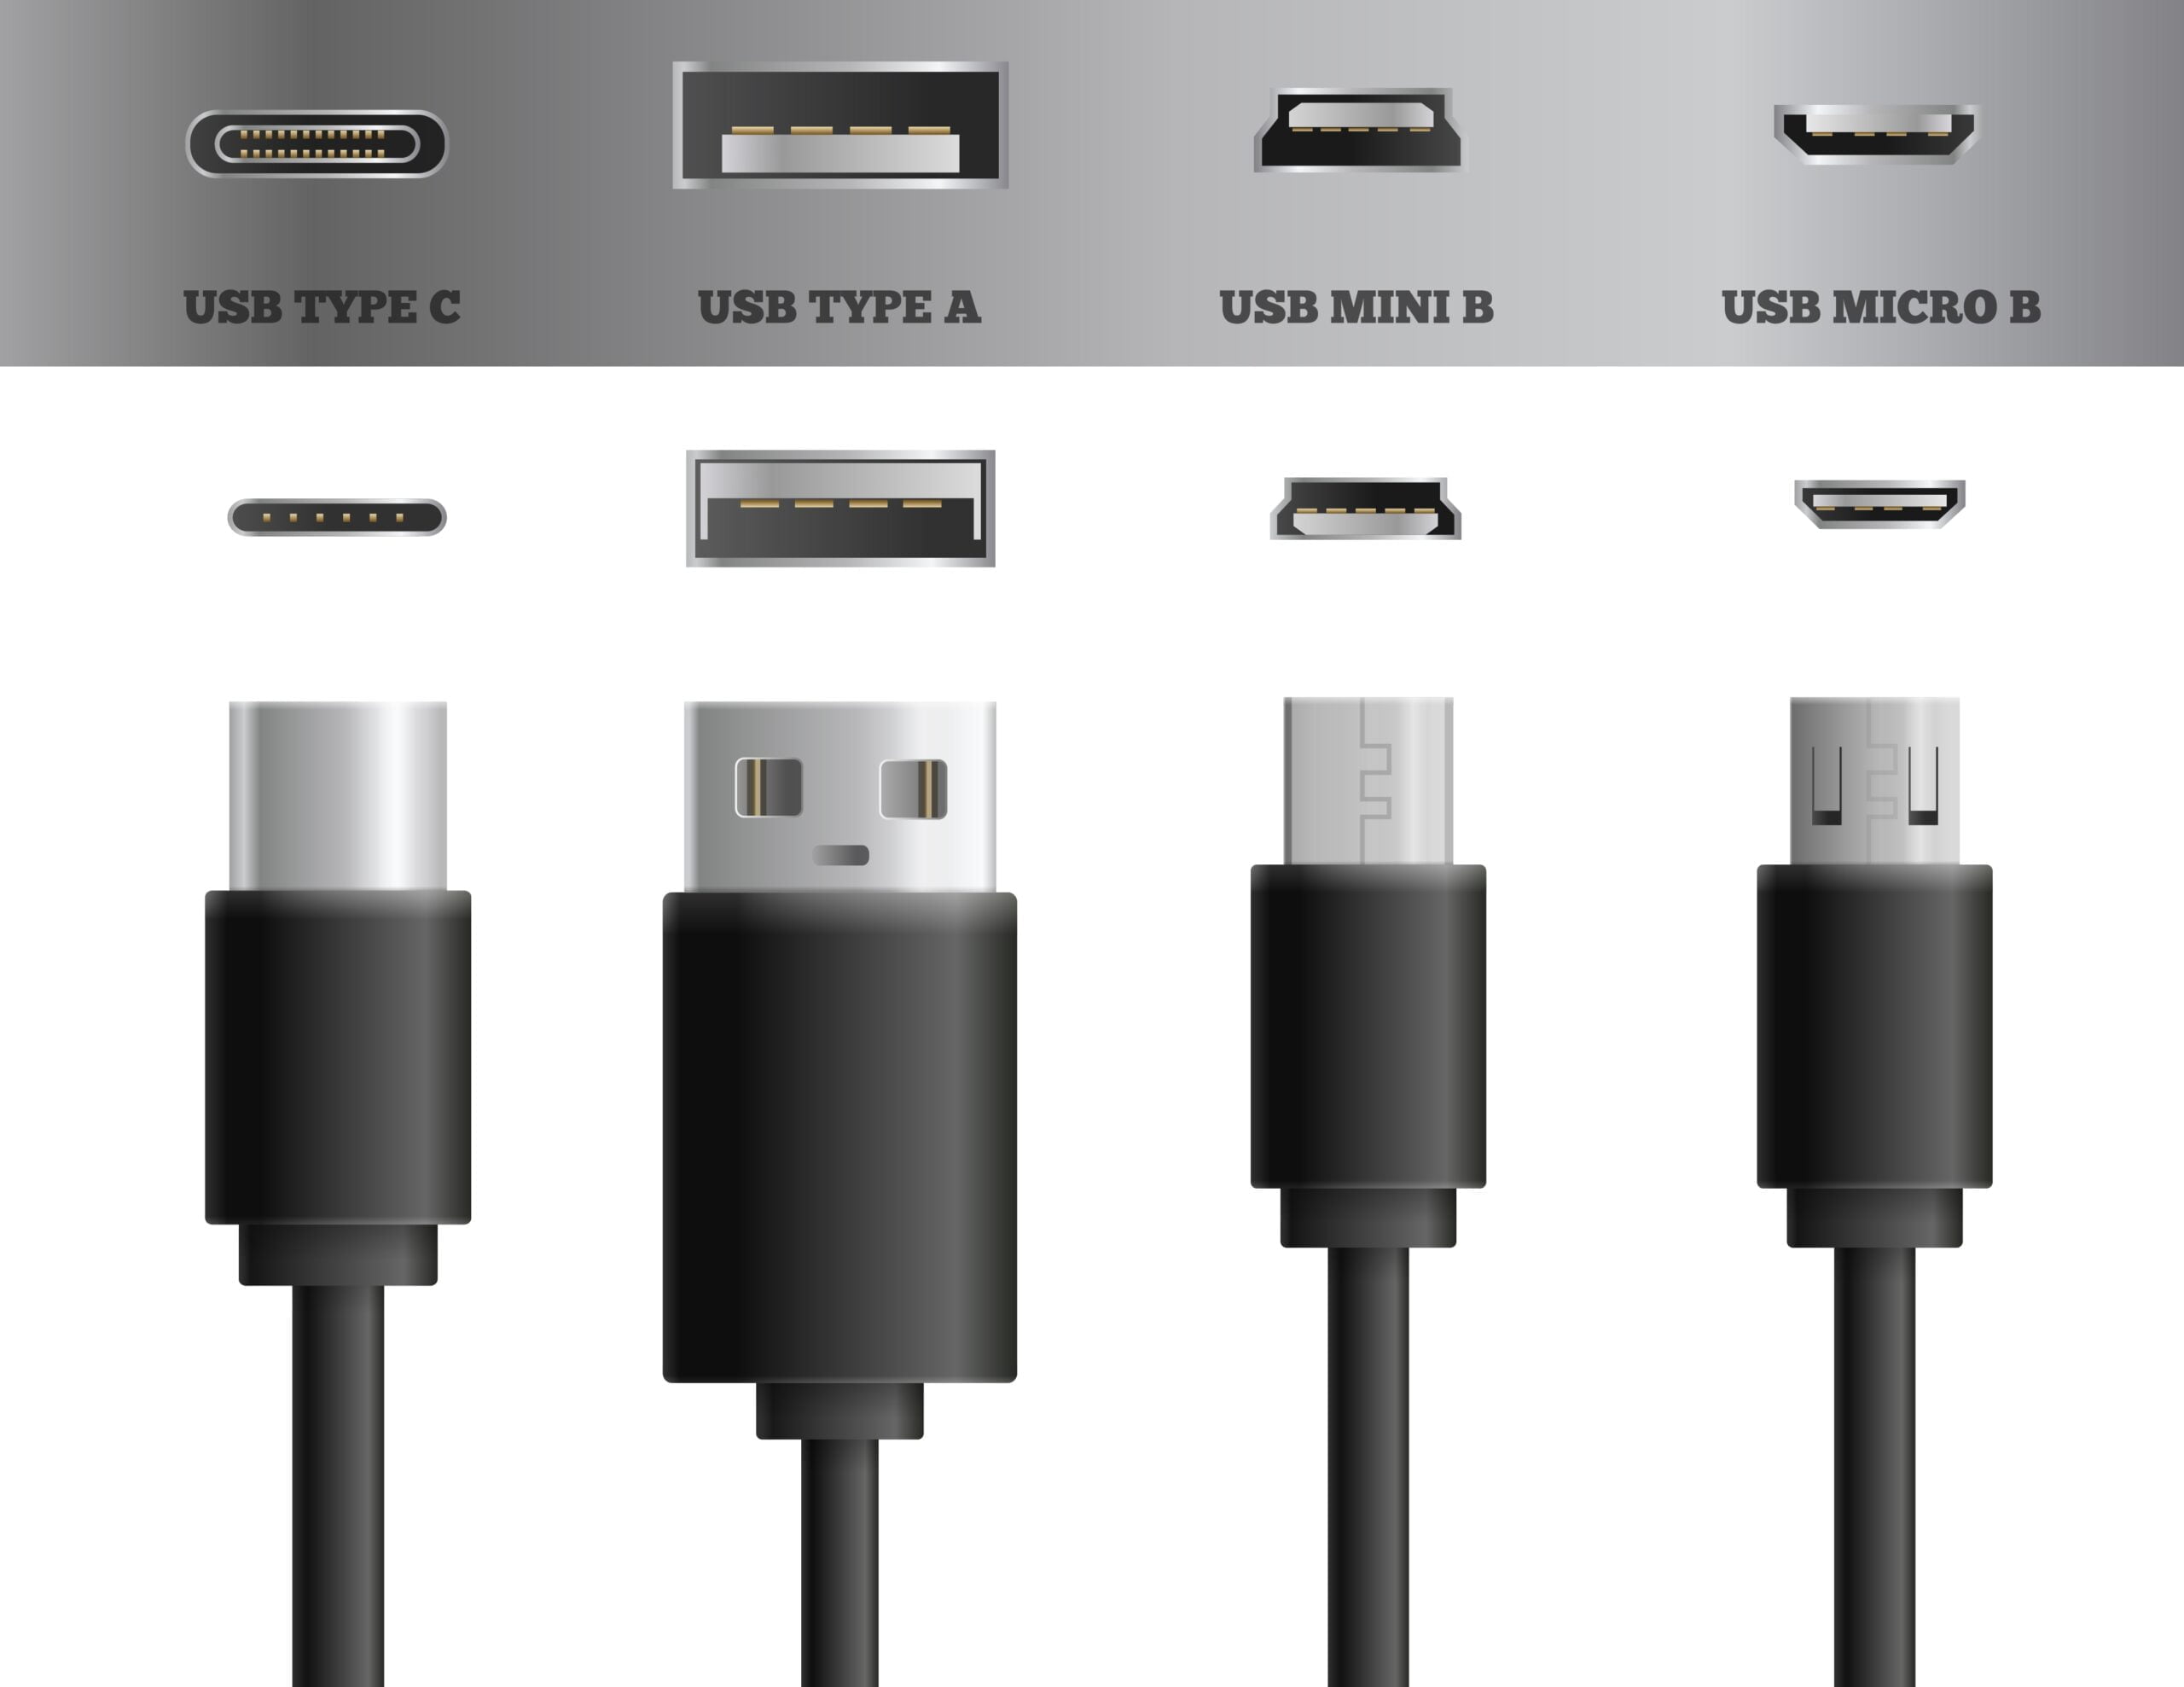 USB ports and cables